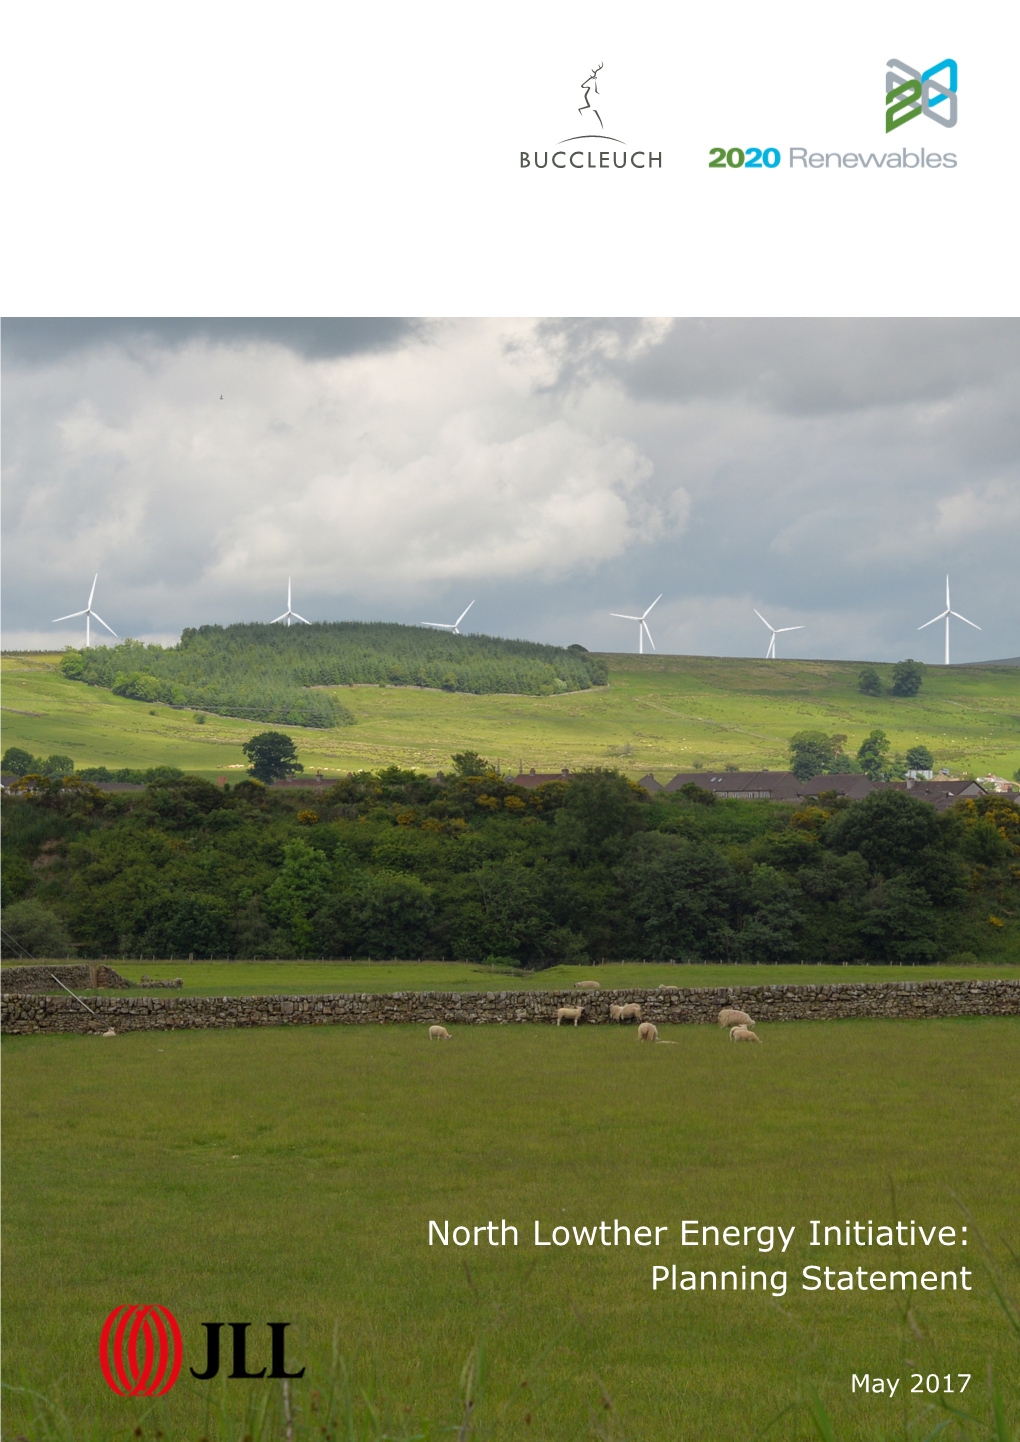 North Lowther Energy Initiative: Planning Statement